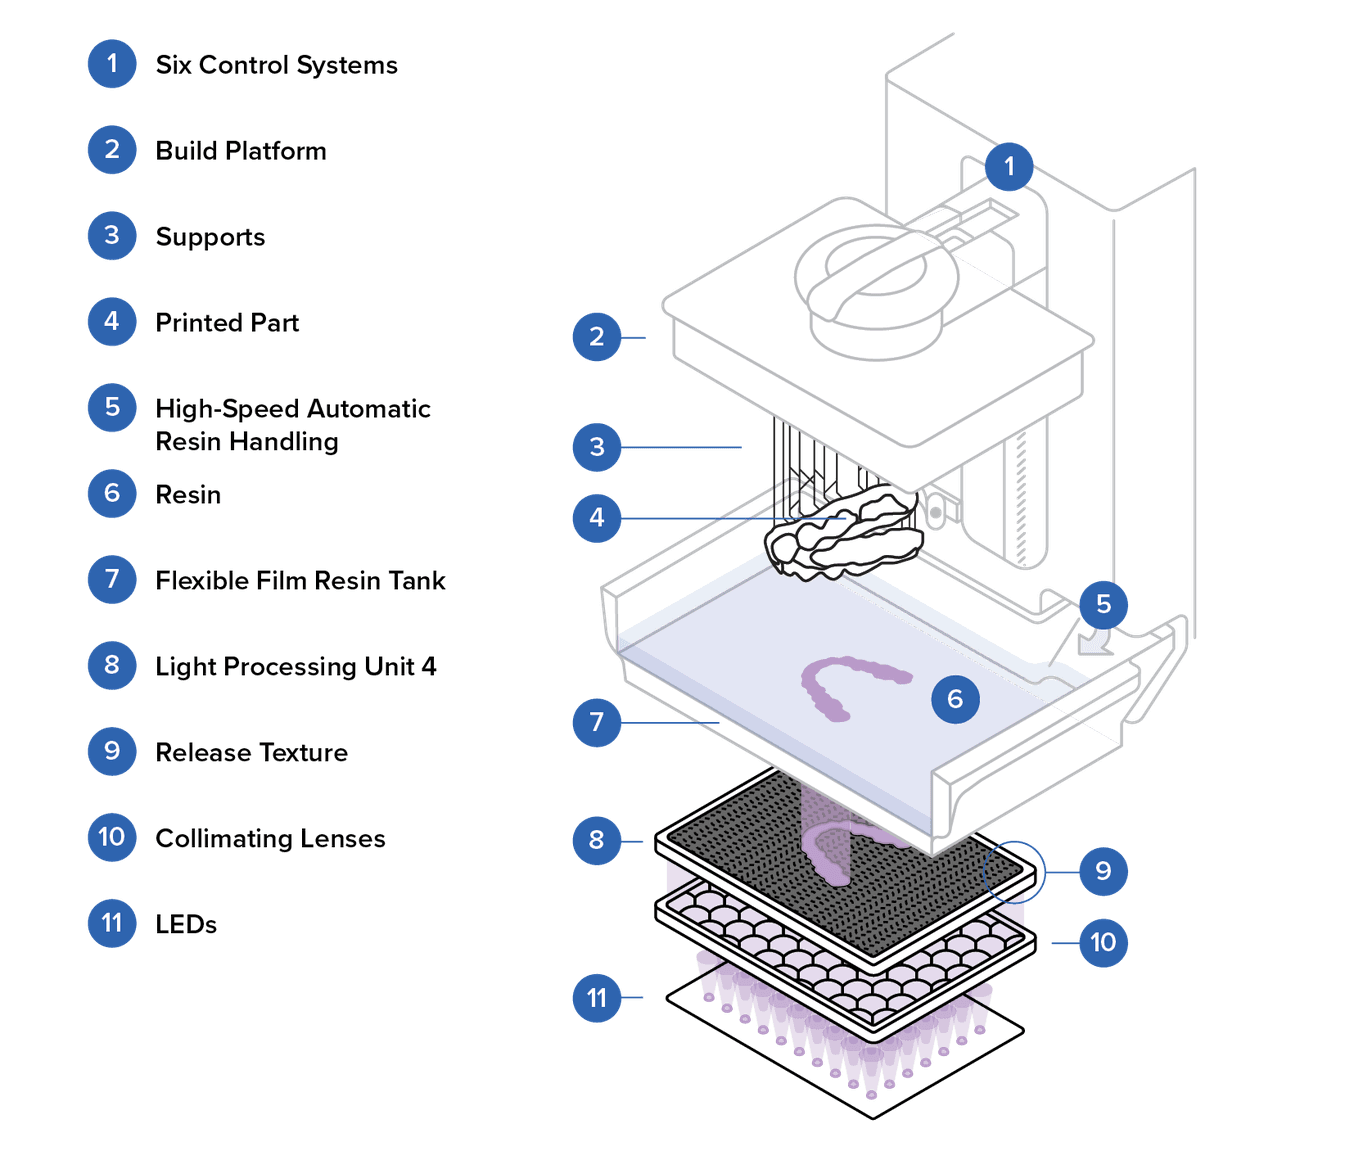 Diagram showing the elements of the LFD print engine including the Laser, resin tank, build platform, and printed part